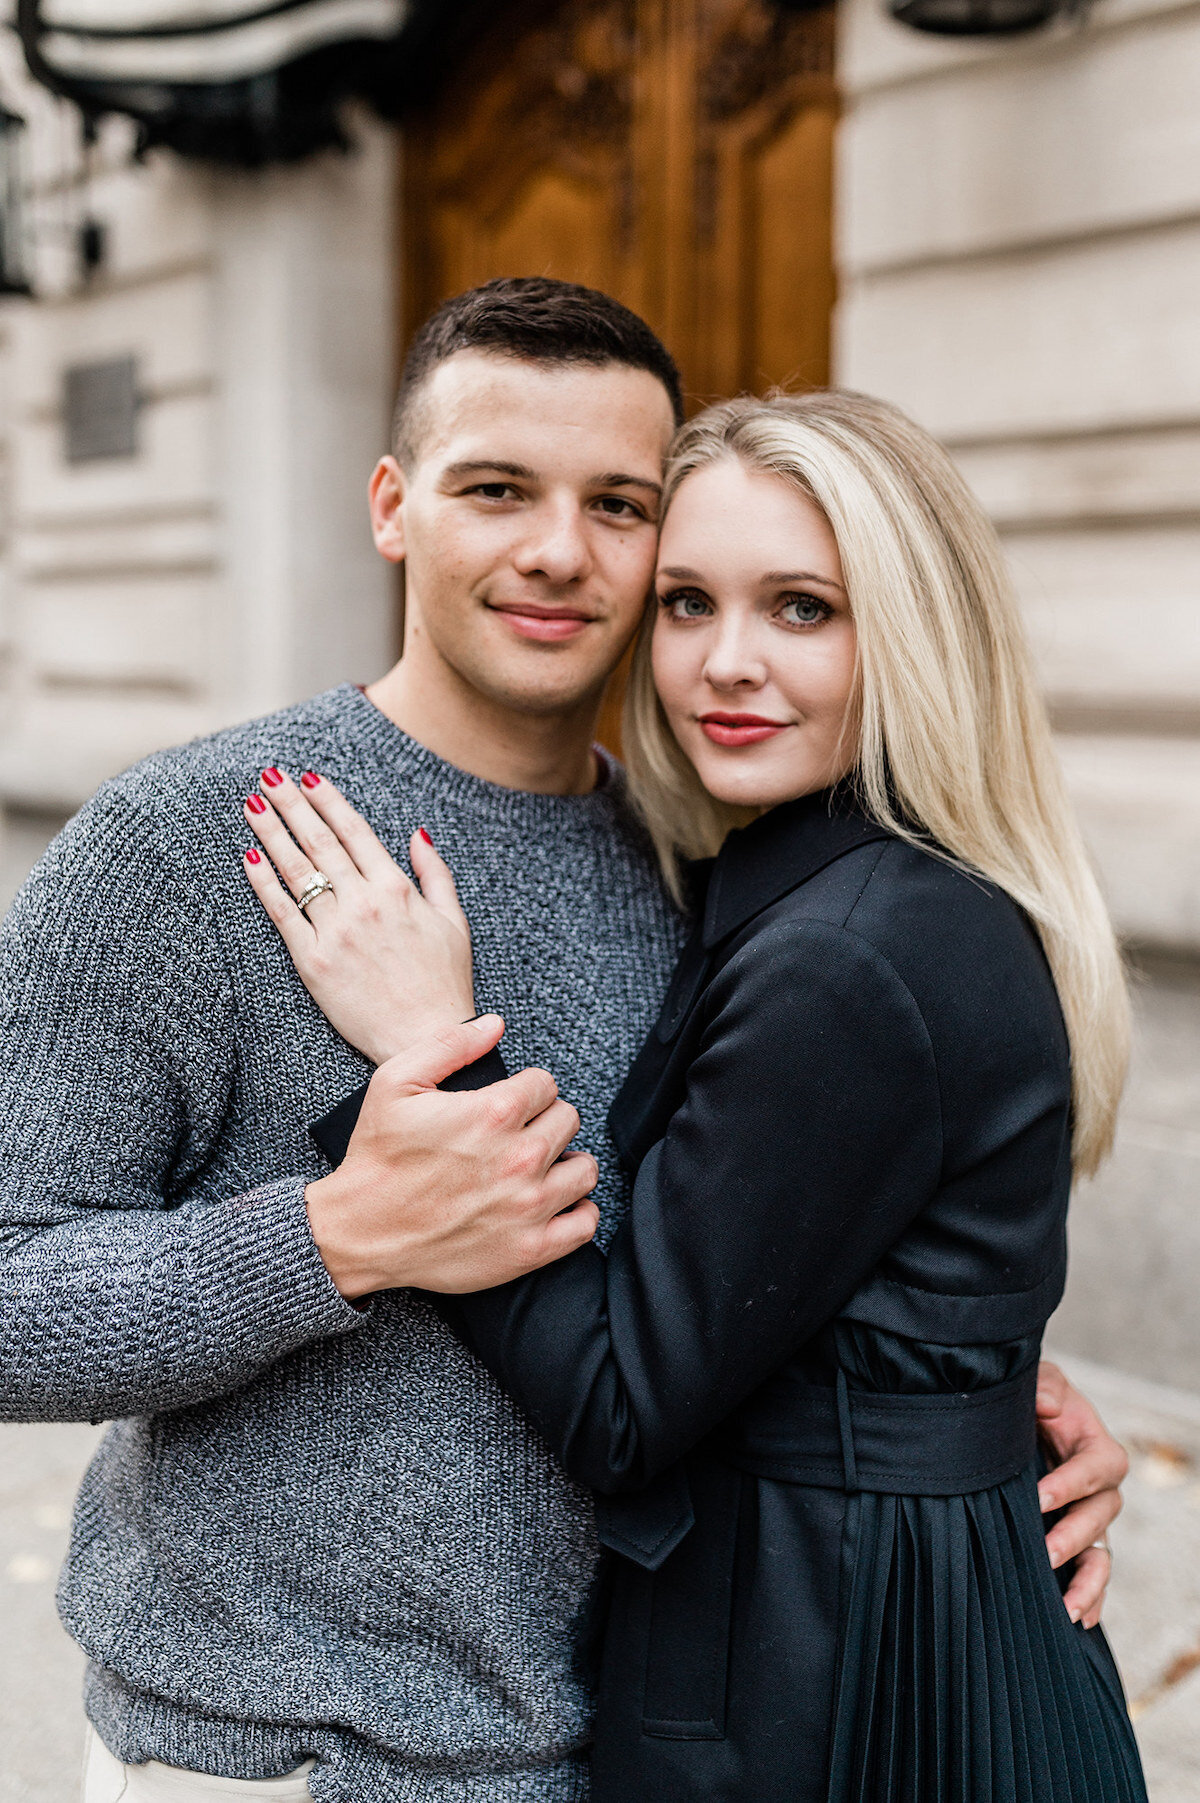 Elevate your engagement memories with the artful touch of our luxury sessions. Our fine art photography in New York captures the nuances of your relationship in a timeless and authentic manner.